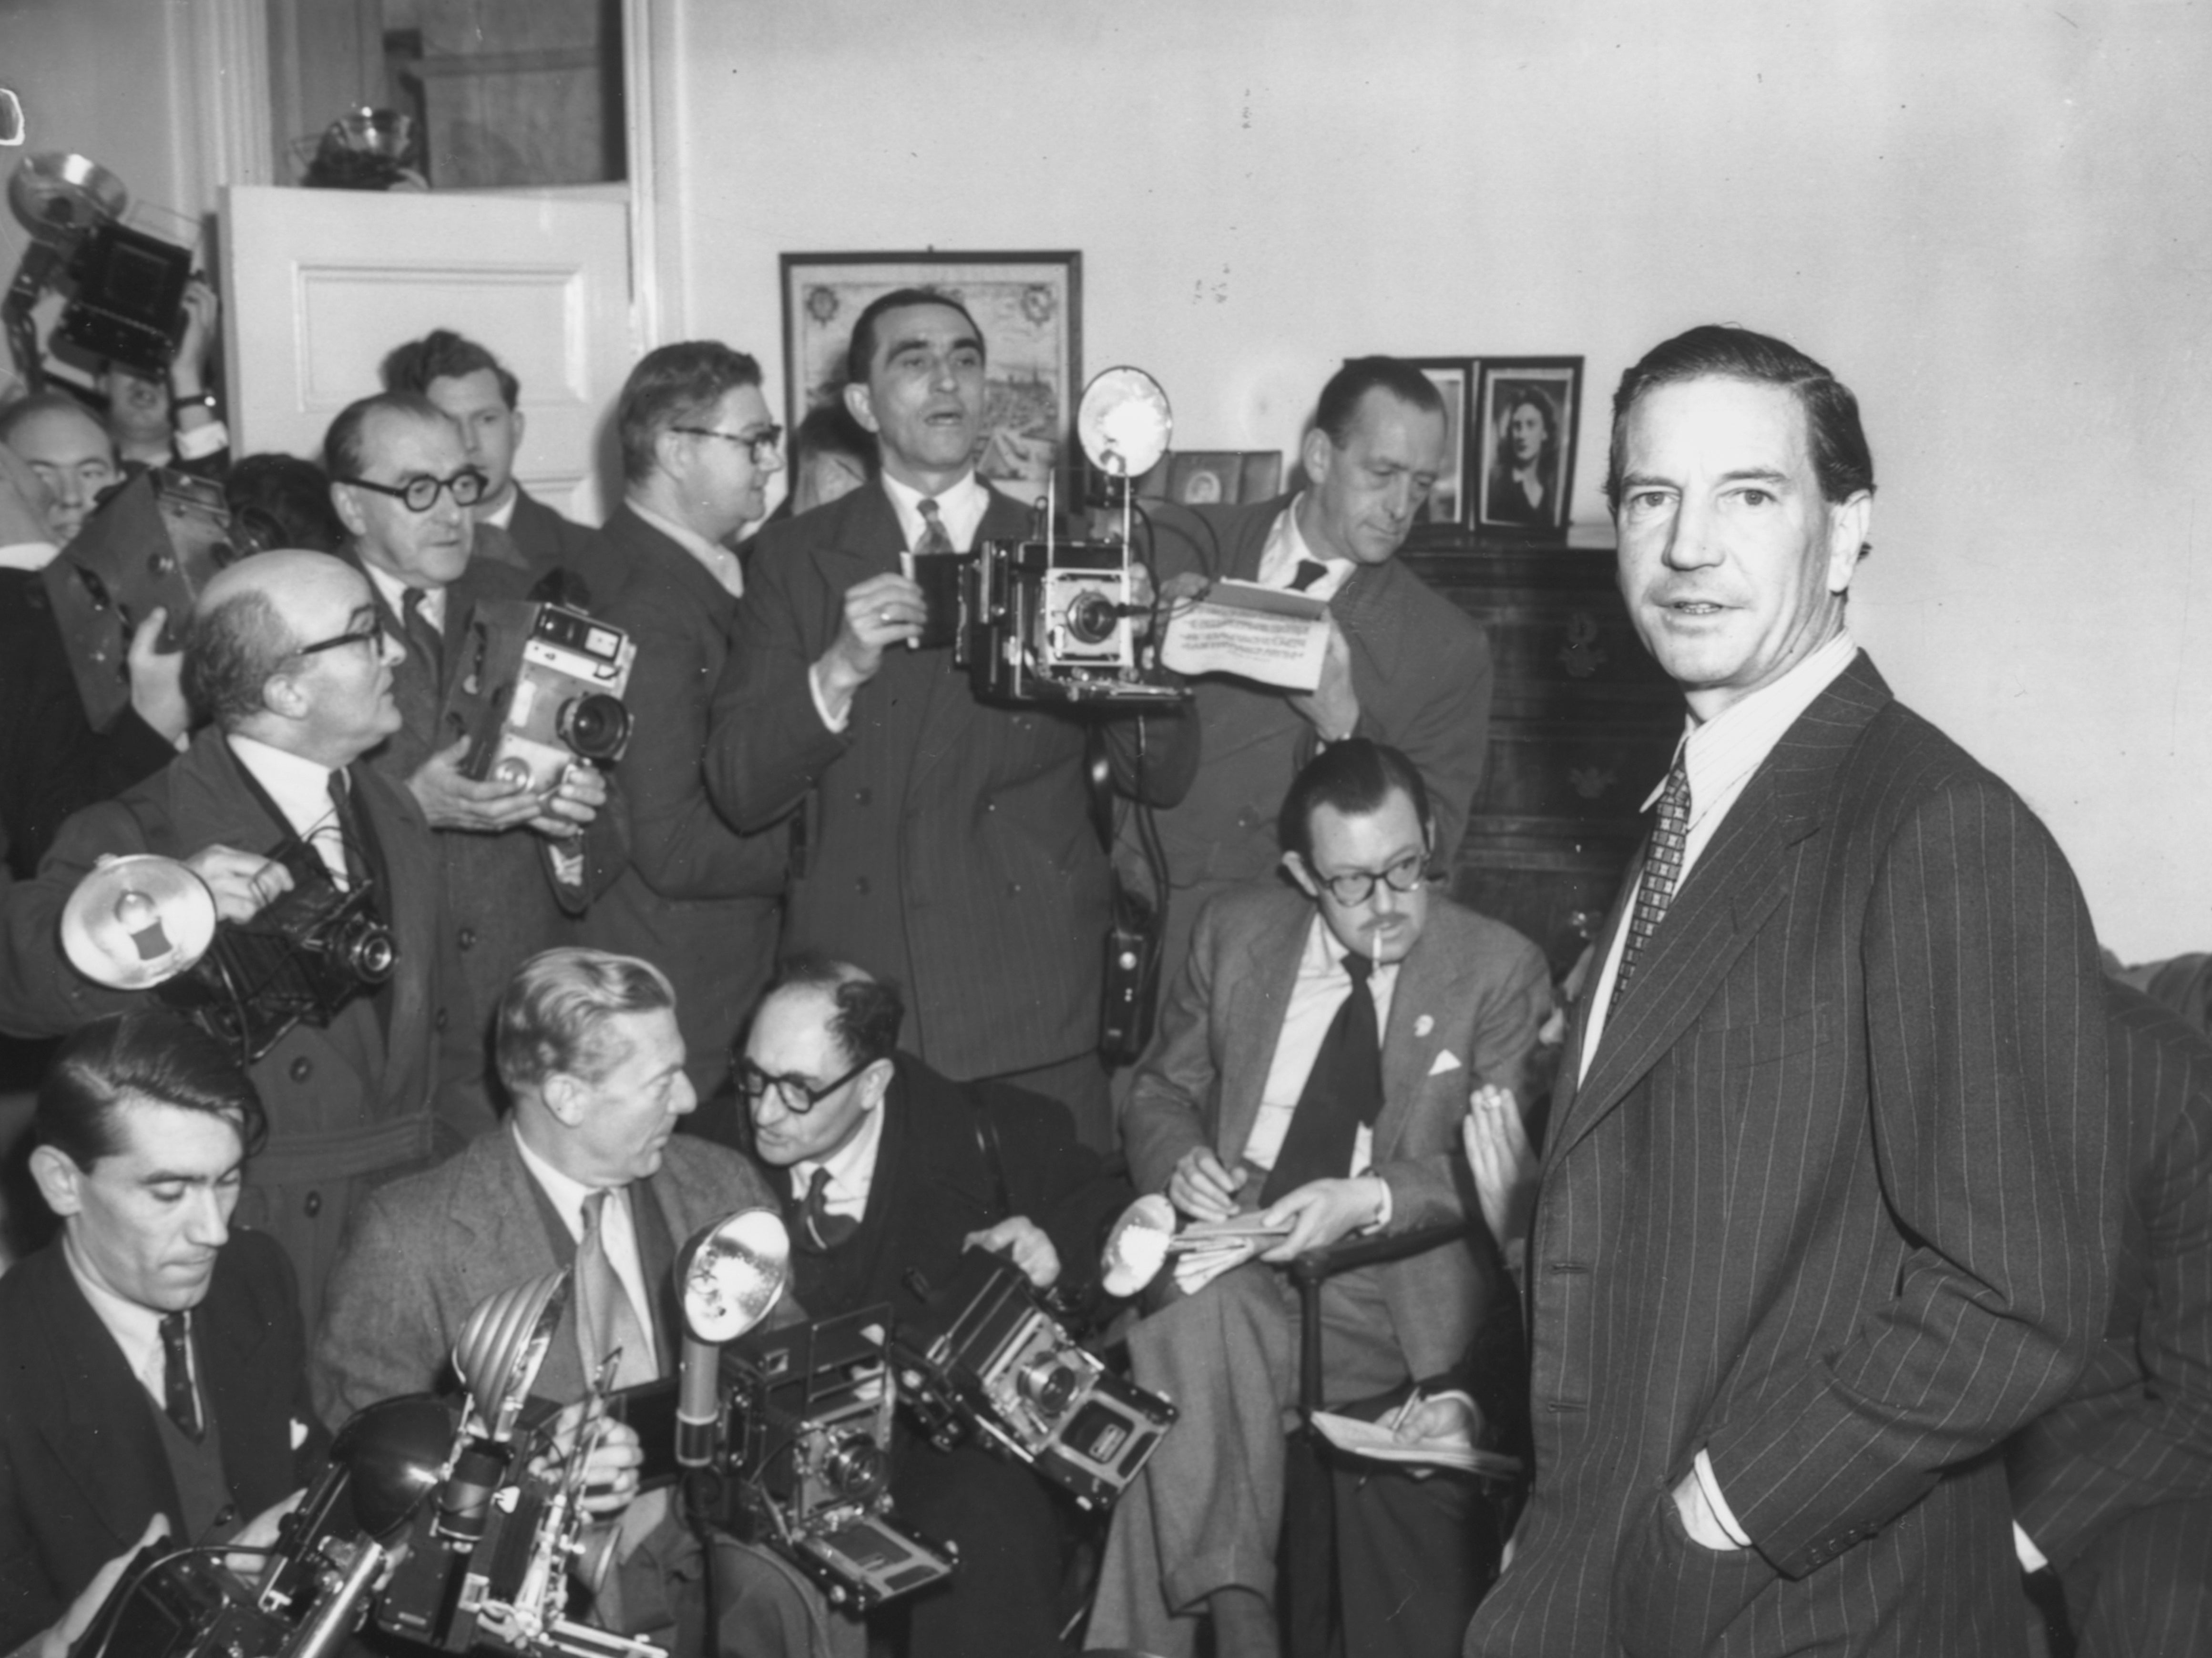 Philby (right) at a London press conference held in response to his involvement with Burgess and McLean, 8 November 1955